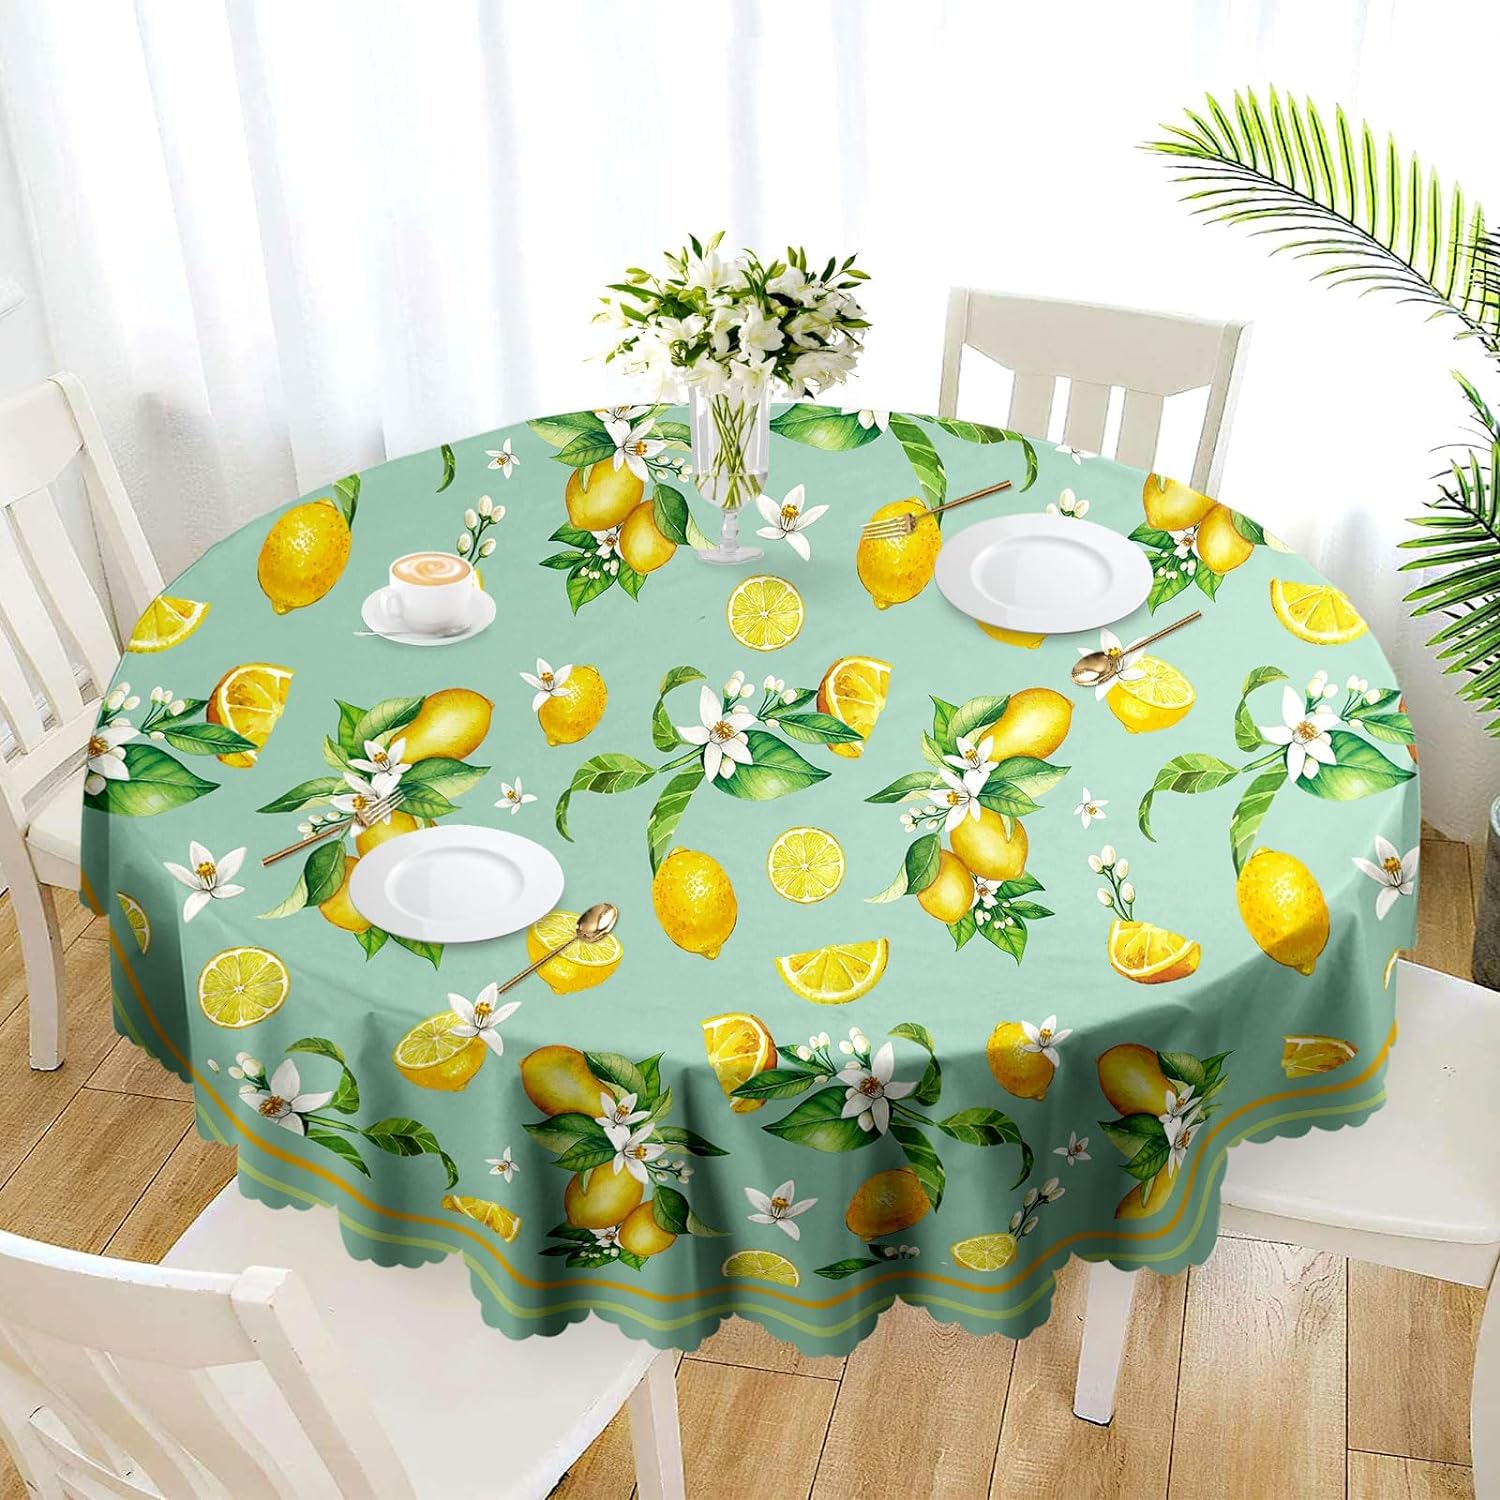 Eikione Lemon Tablecloth 60 Inch, Circle Outdoor Waterproof Fabric Tablecloth Wipeable Green Dining Table Cover for Picnic